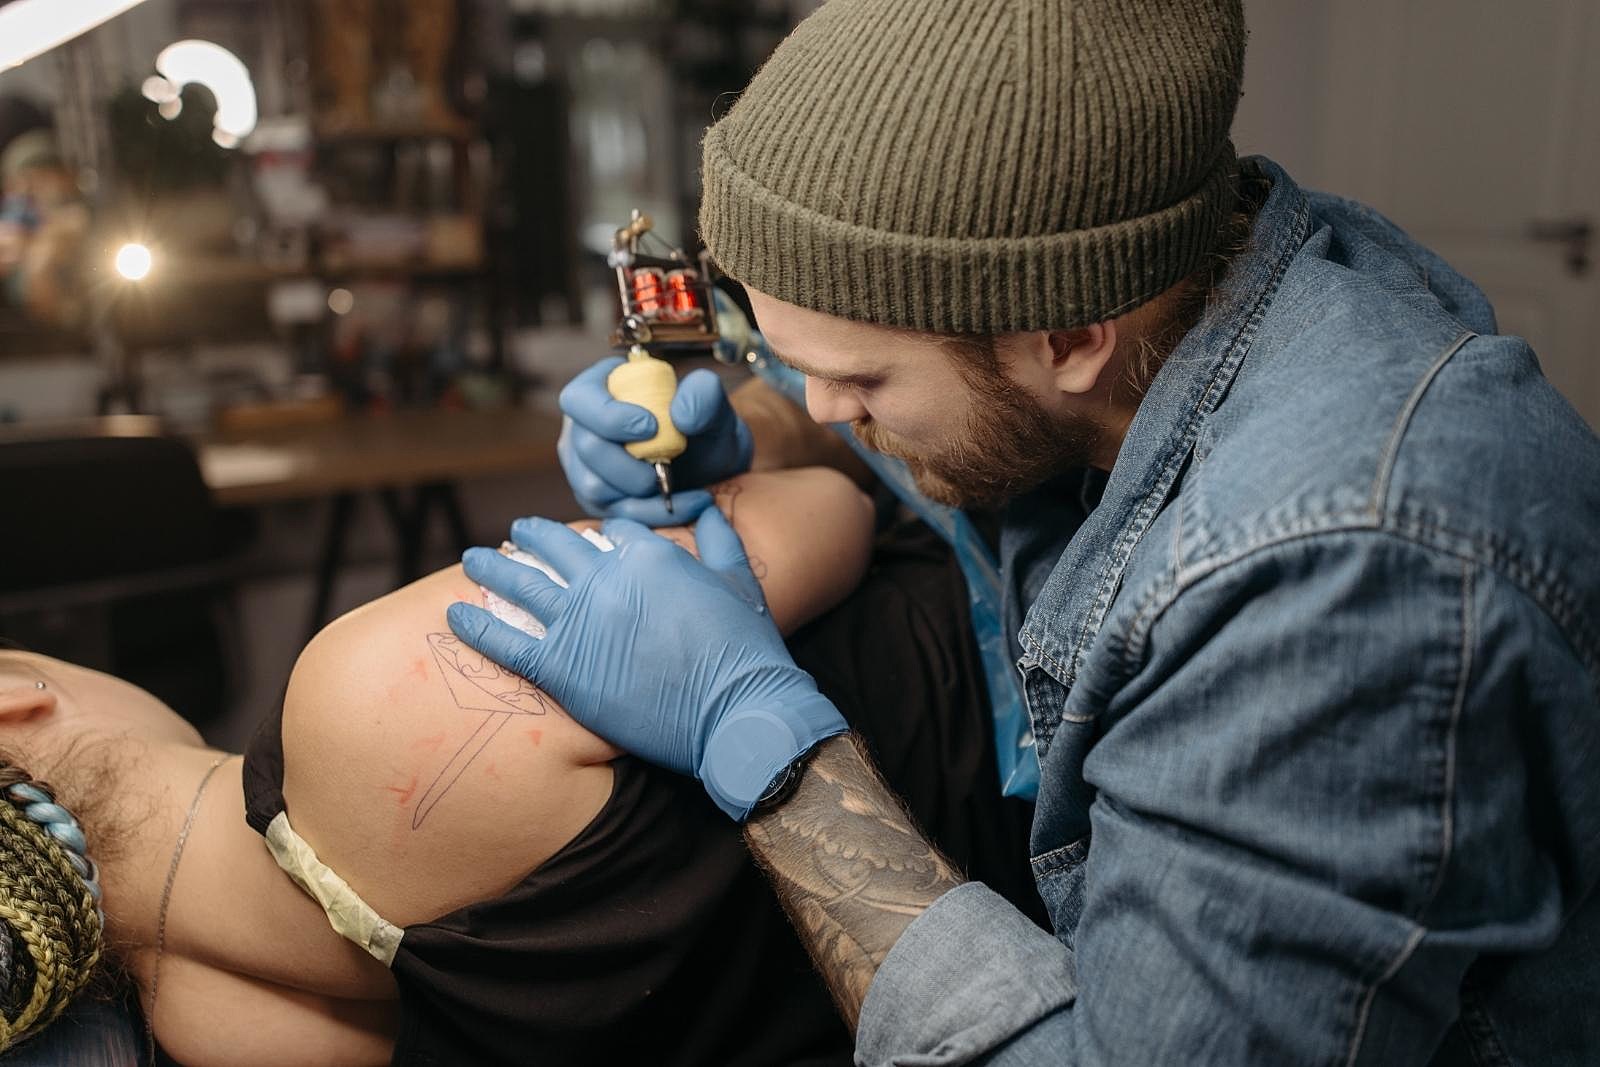 Citizens Advice Bureau Wellington - There is no legal minimum age for  getting a tattoo or piercing. However, there are some restrictions which  may apply depending on where you live and which